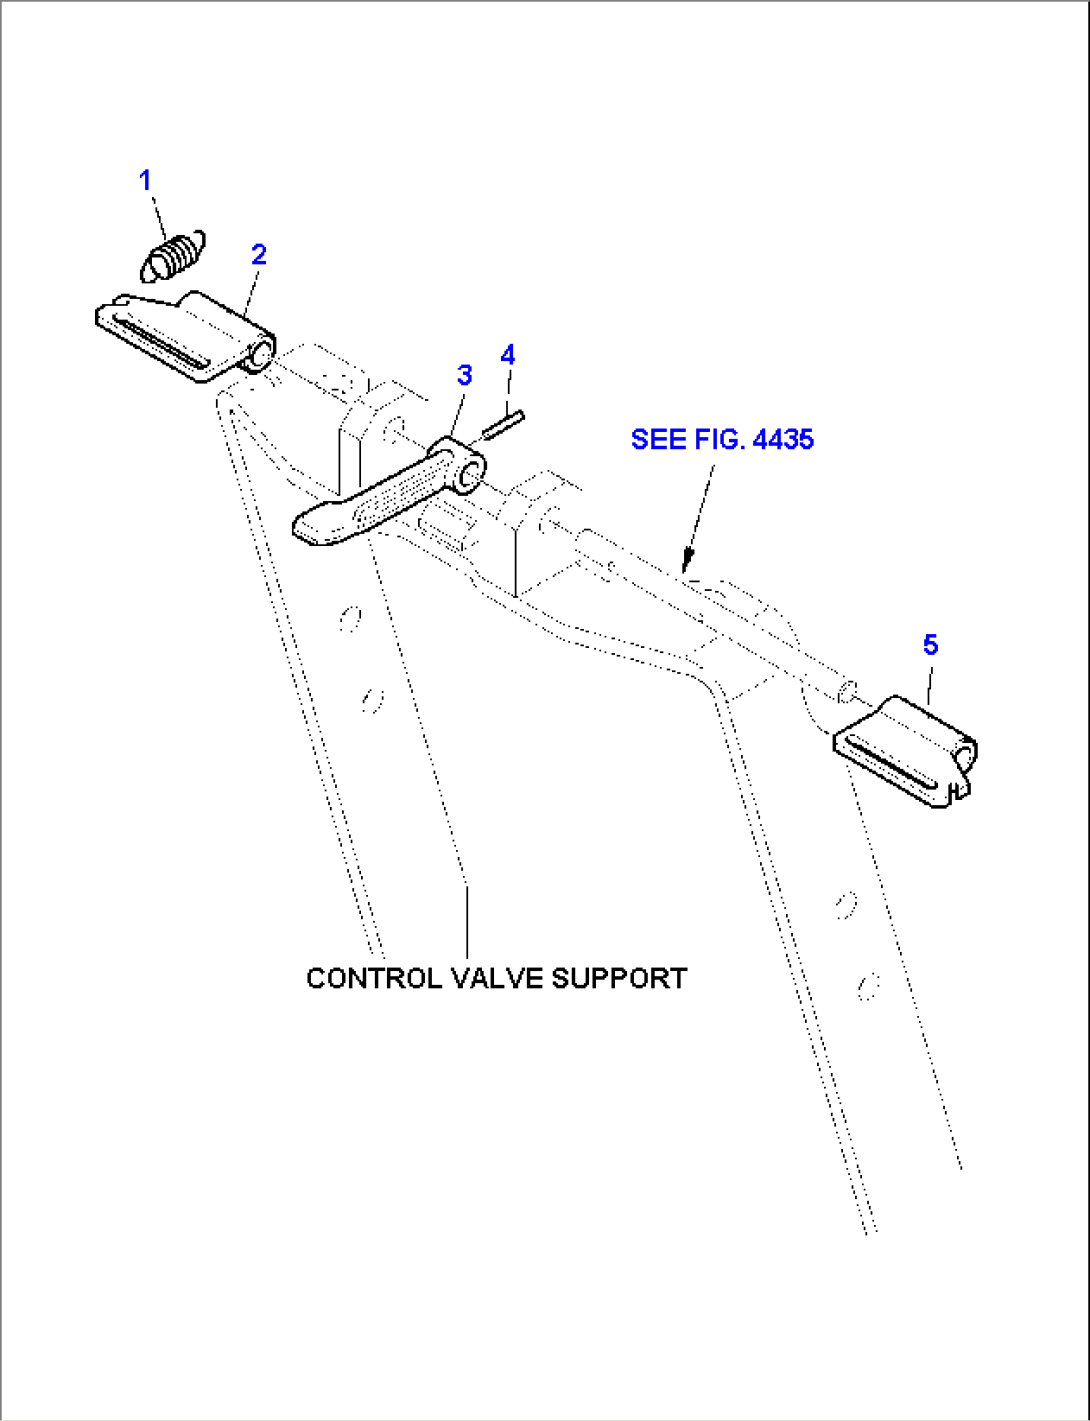 LOCK LEVER BACKHOE CONTROL (WITH MECHANICAL CONTROL)